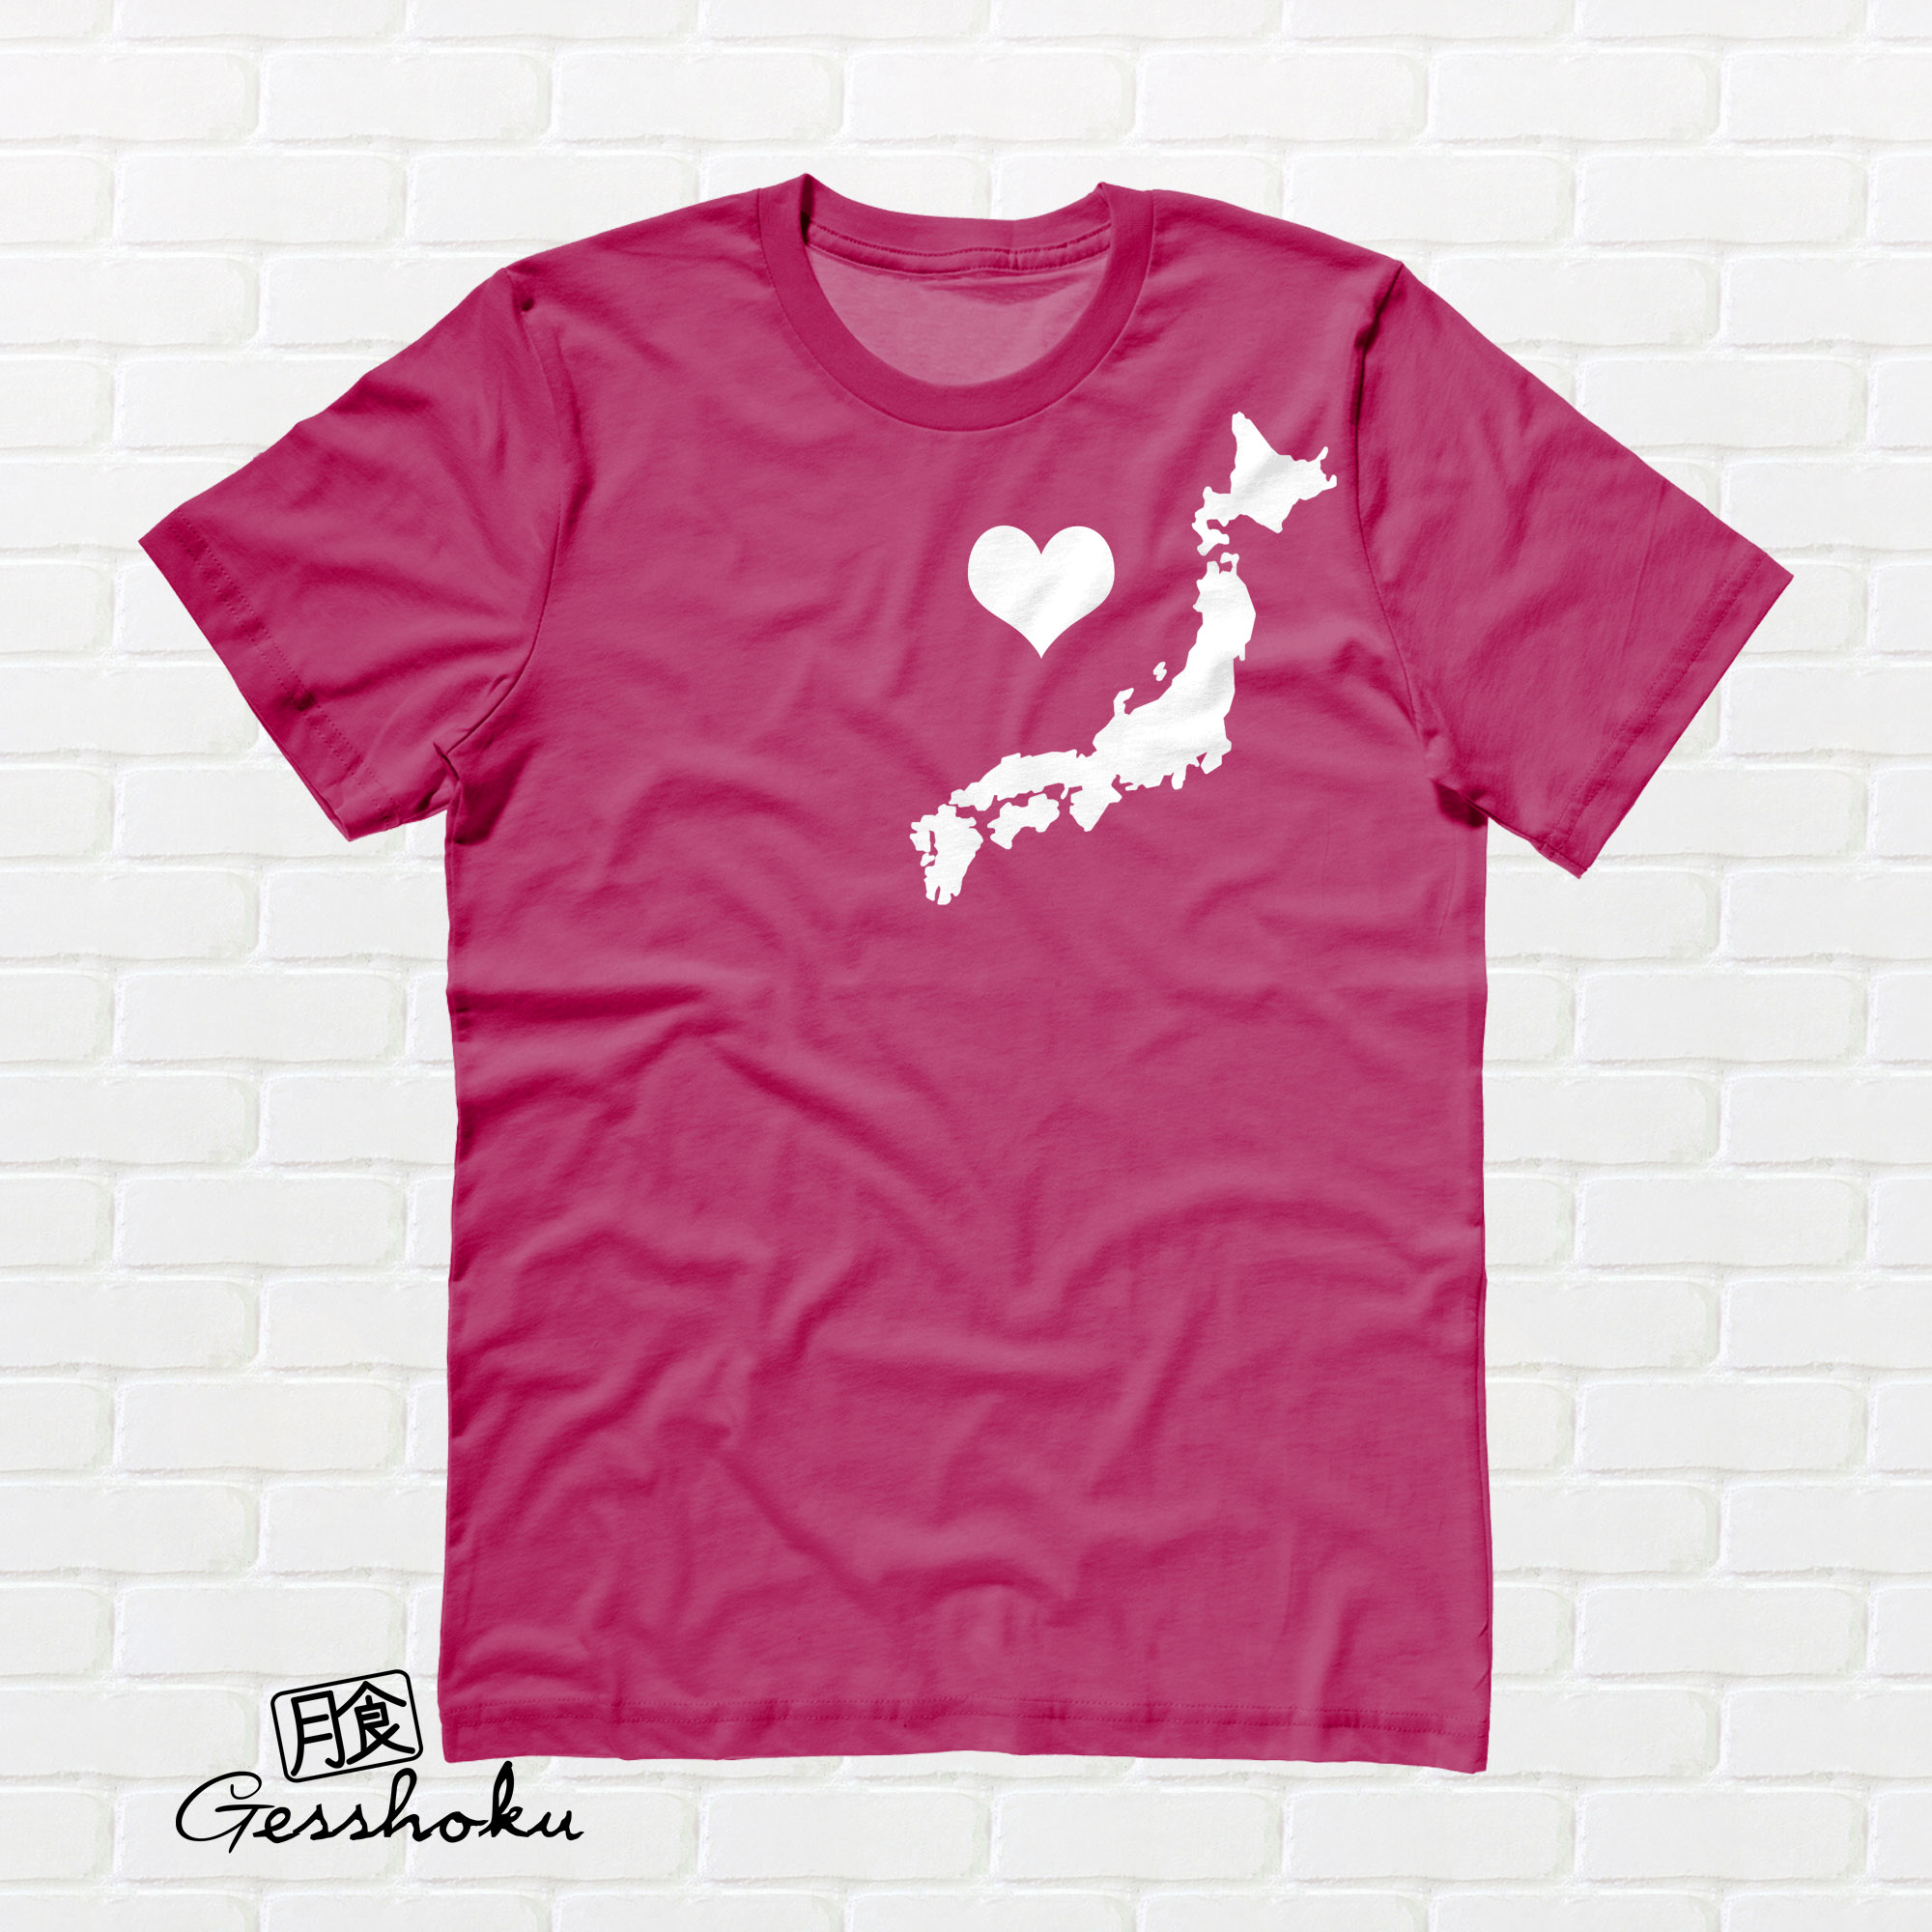 My Heart in Japan T-shirt - Hot Pink